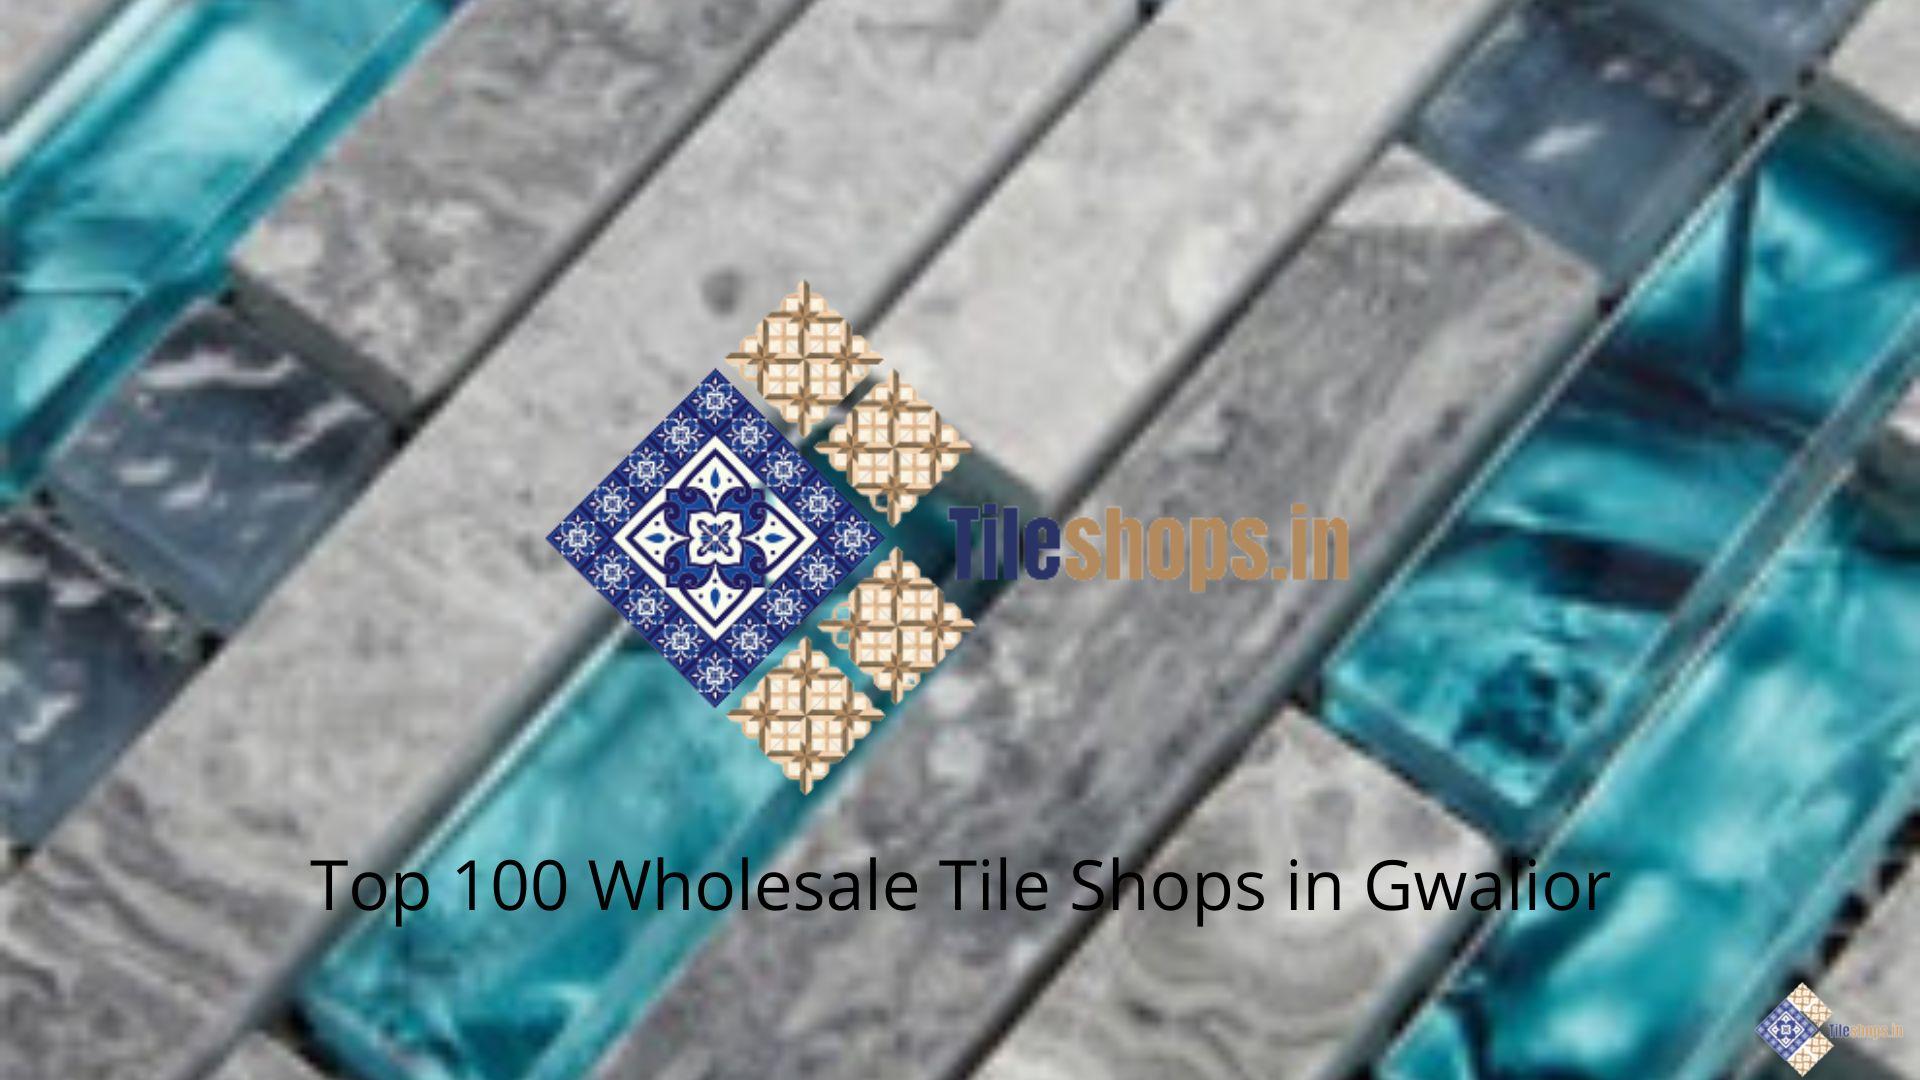 Top 100 Wholesale Tile Shops in Gwalior